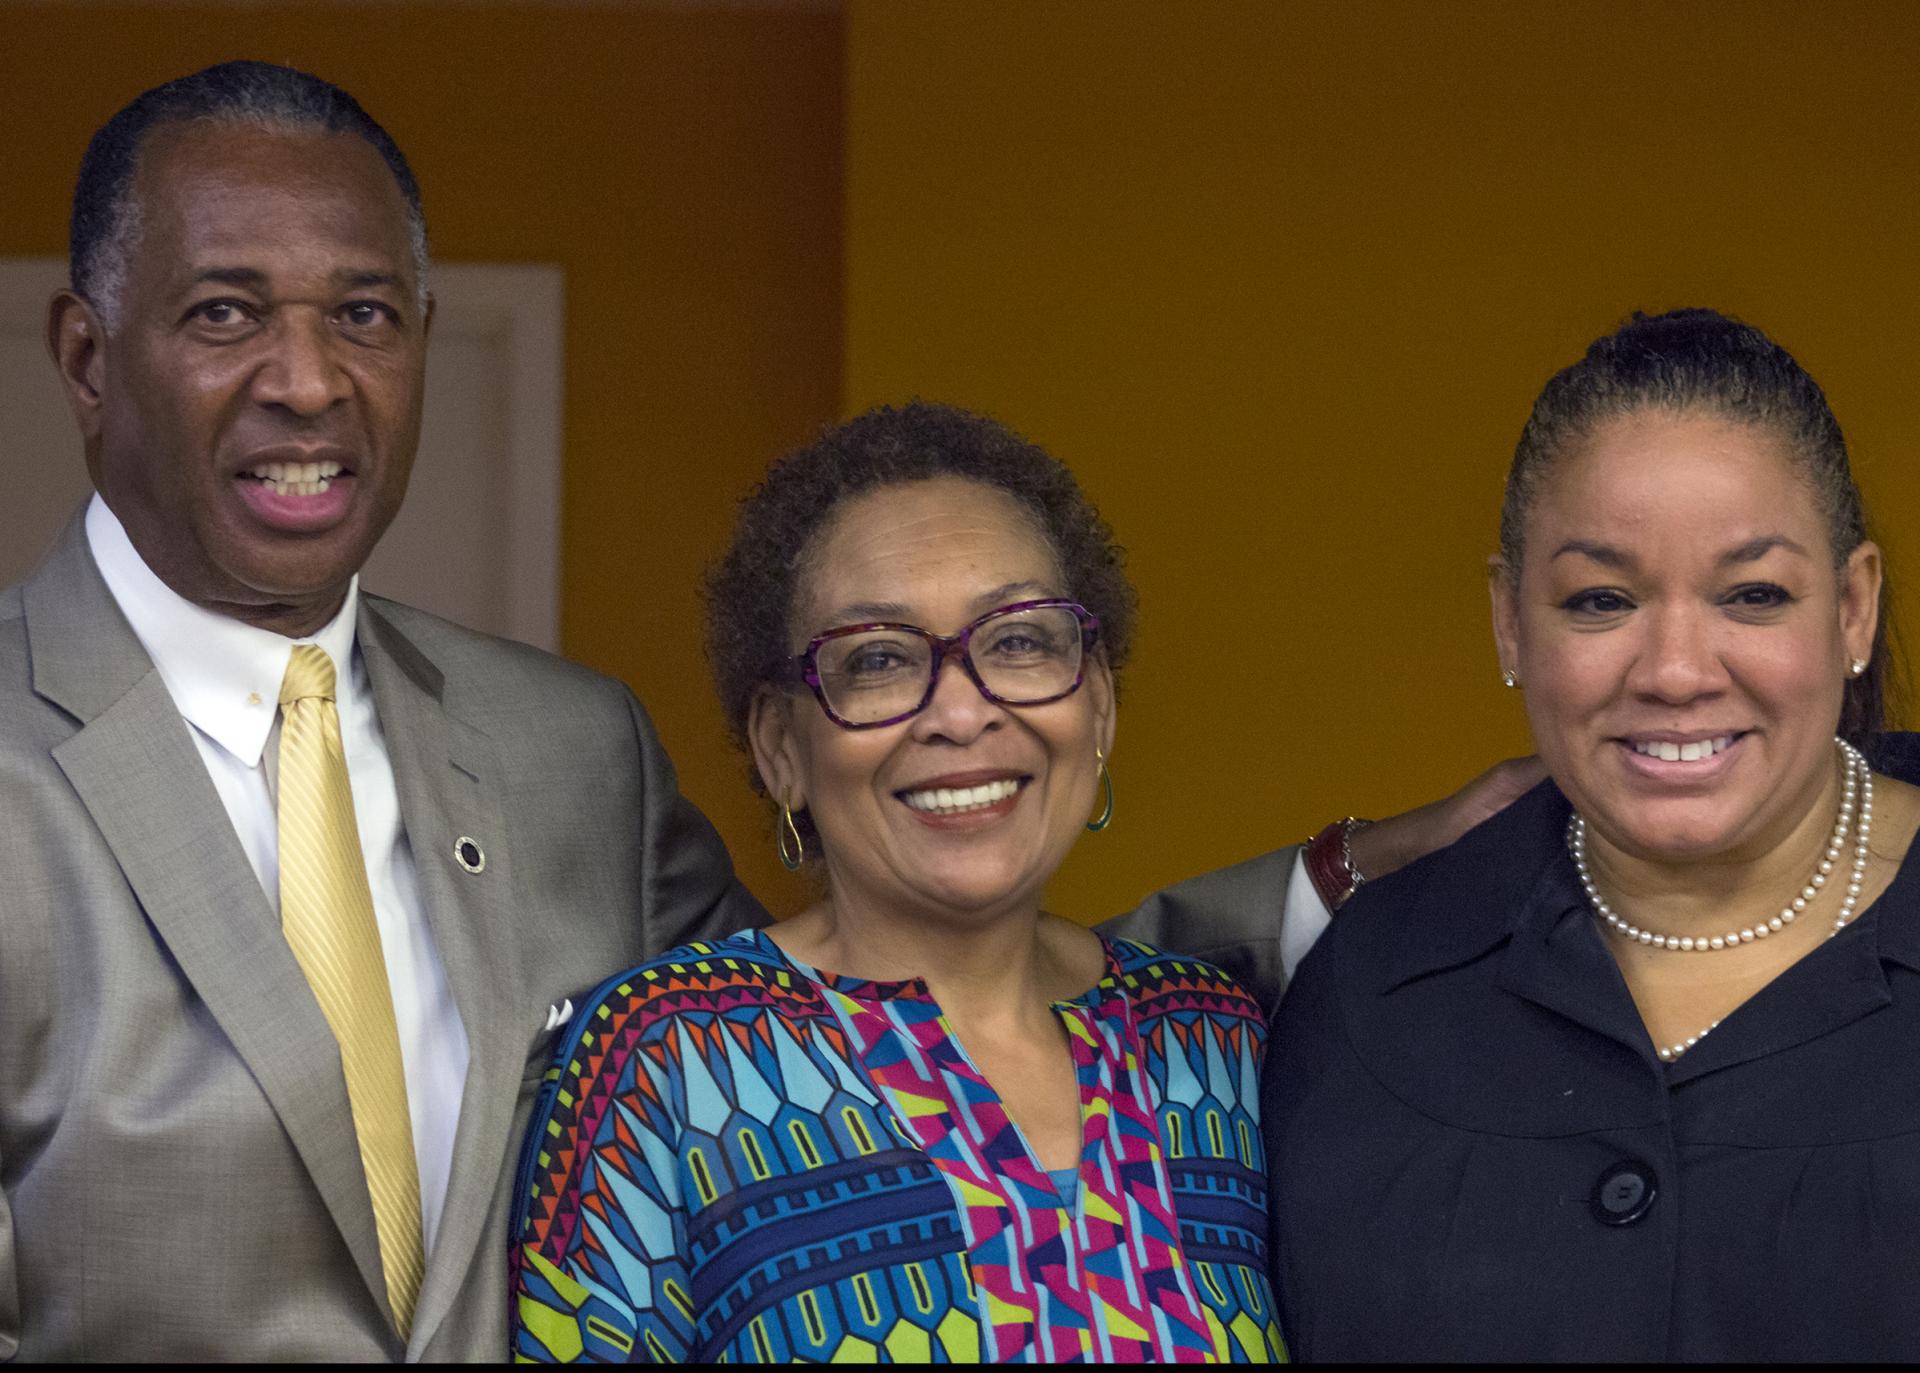 La-Verna Fountain (center) with Rev. Jacques DeGraff (left) and Kimberly Hardy (right), a deputy commissioner at NYC's Small Business Services, at the Greater Harlem Chamber of Commerce's 2017 NYC Economic Development Day